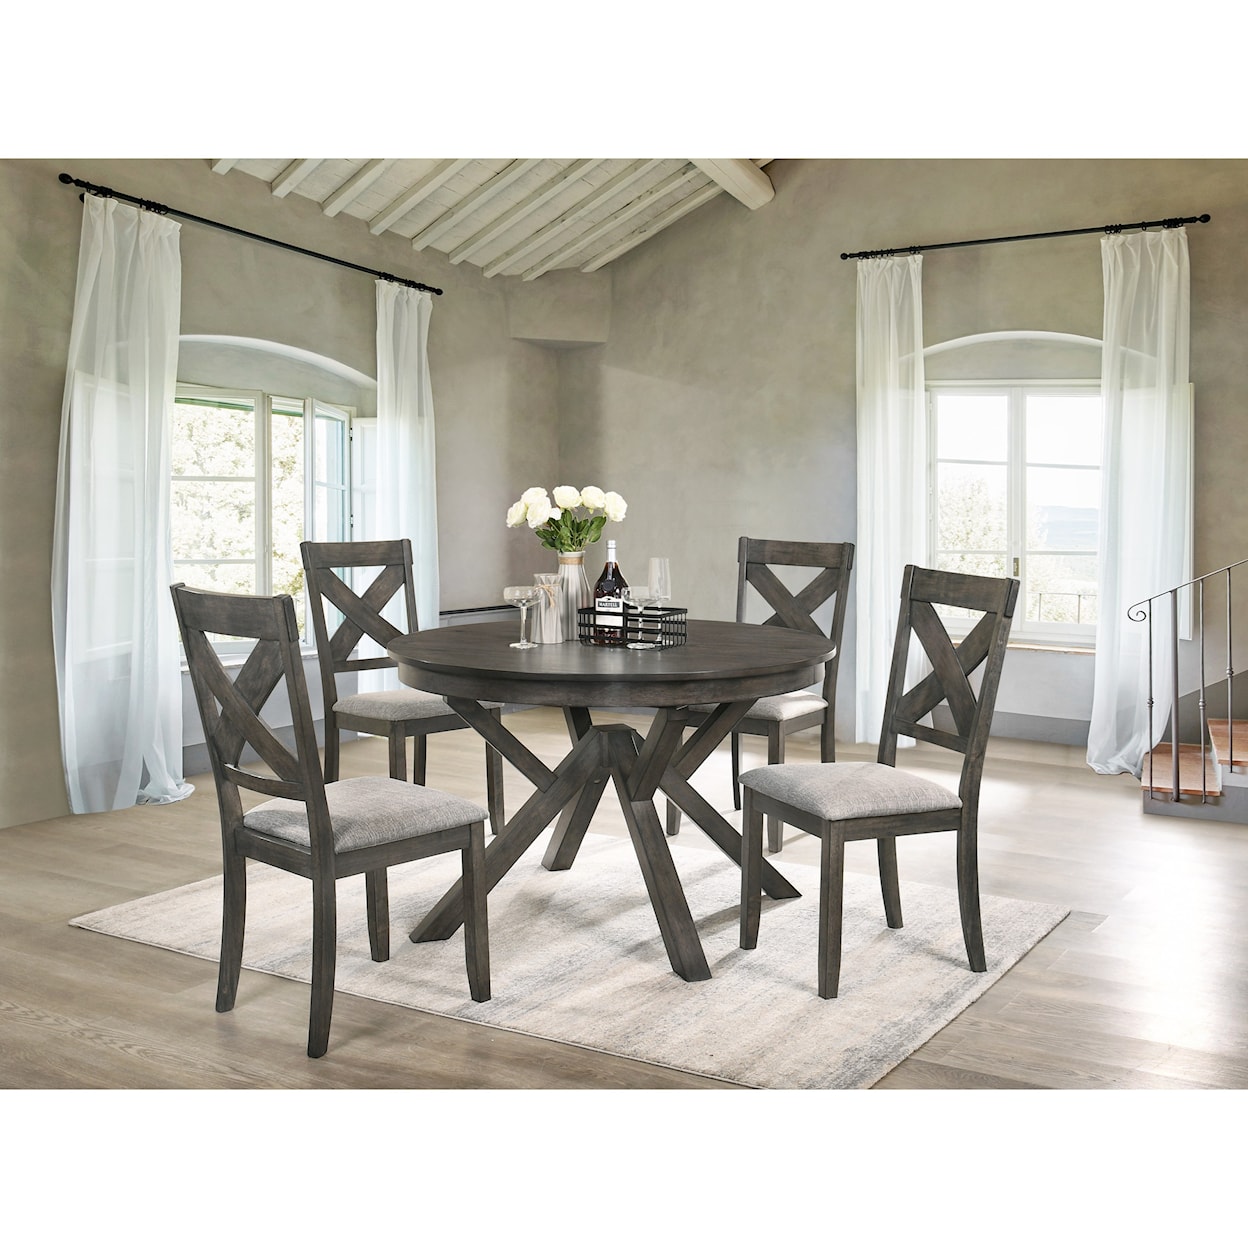 New Classic Gulliver 5-Piece Table and Chair Set